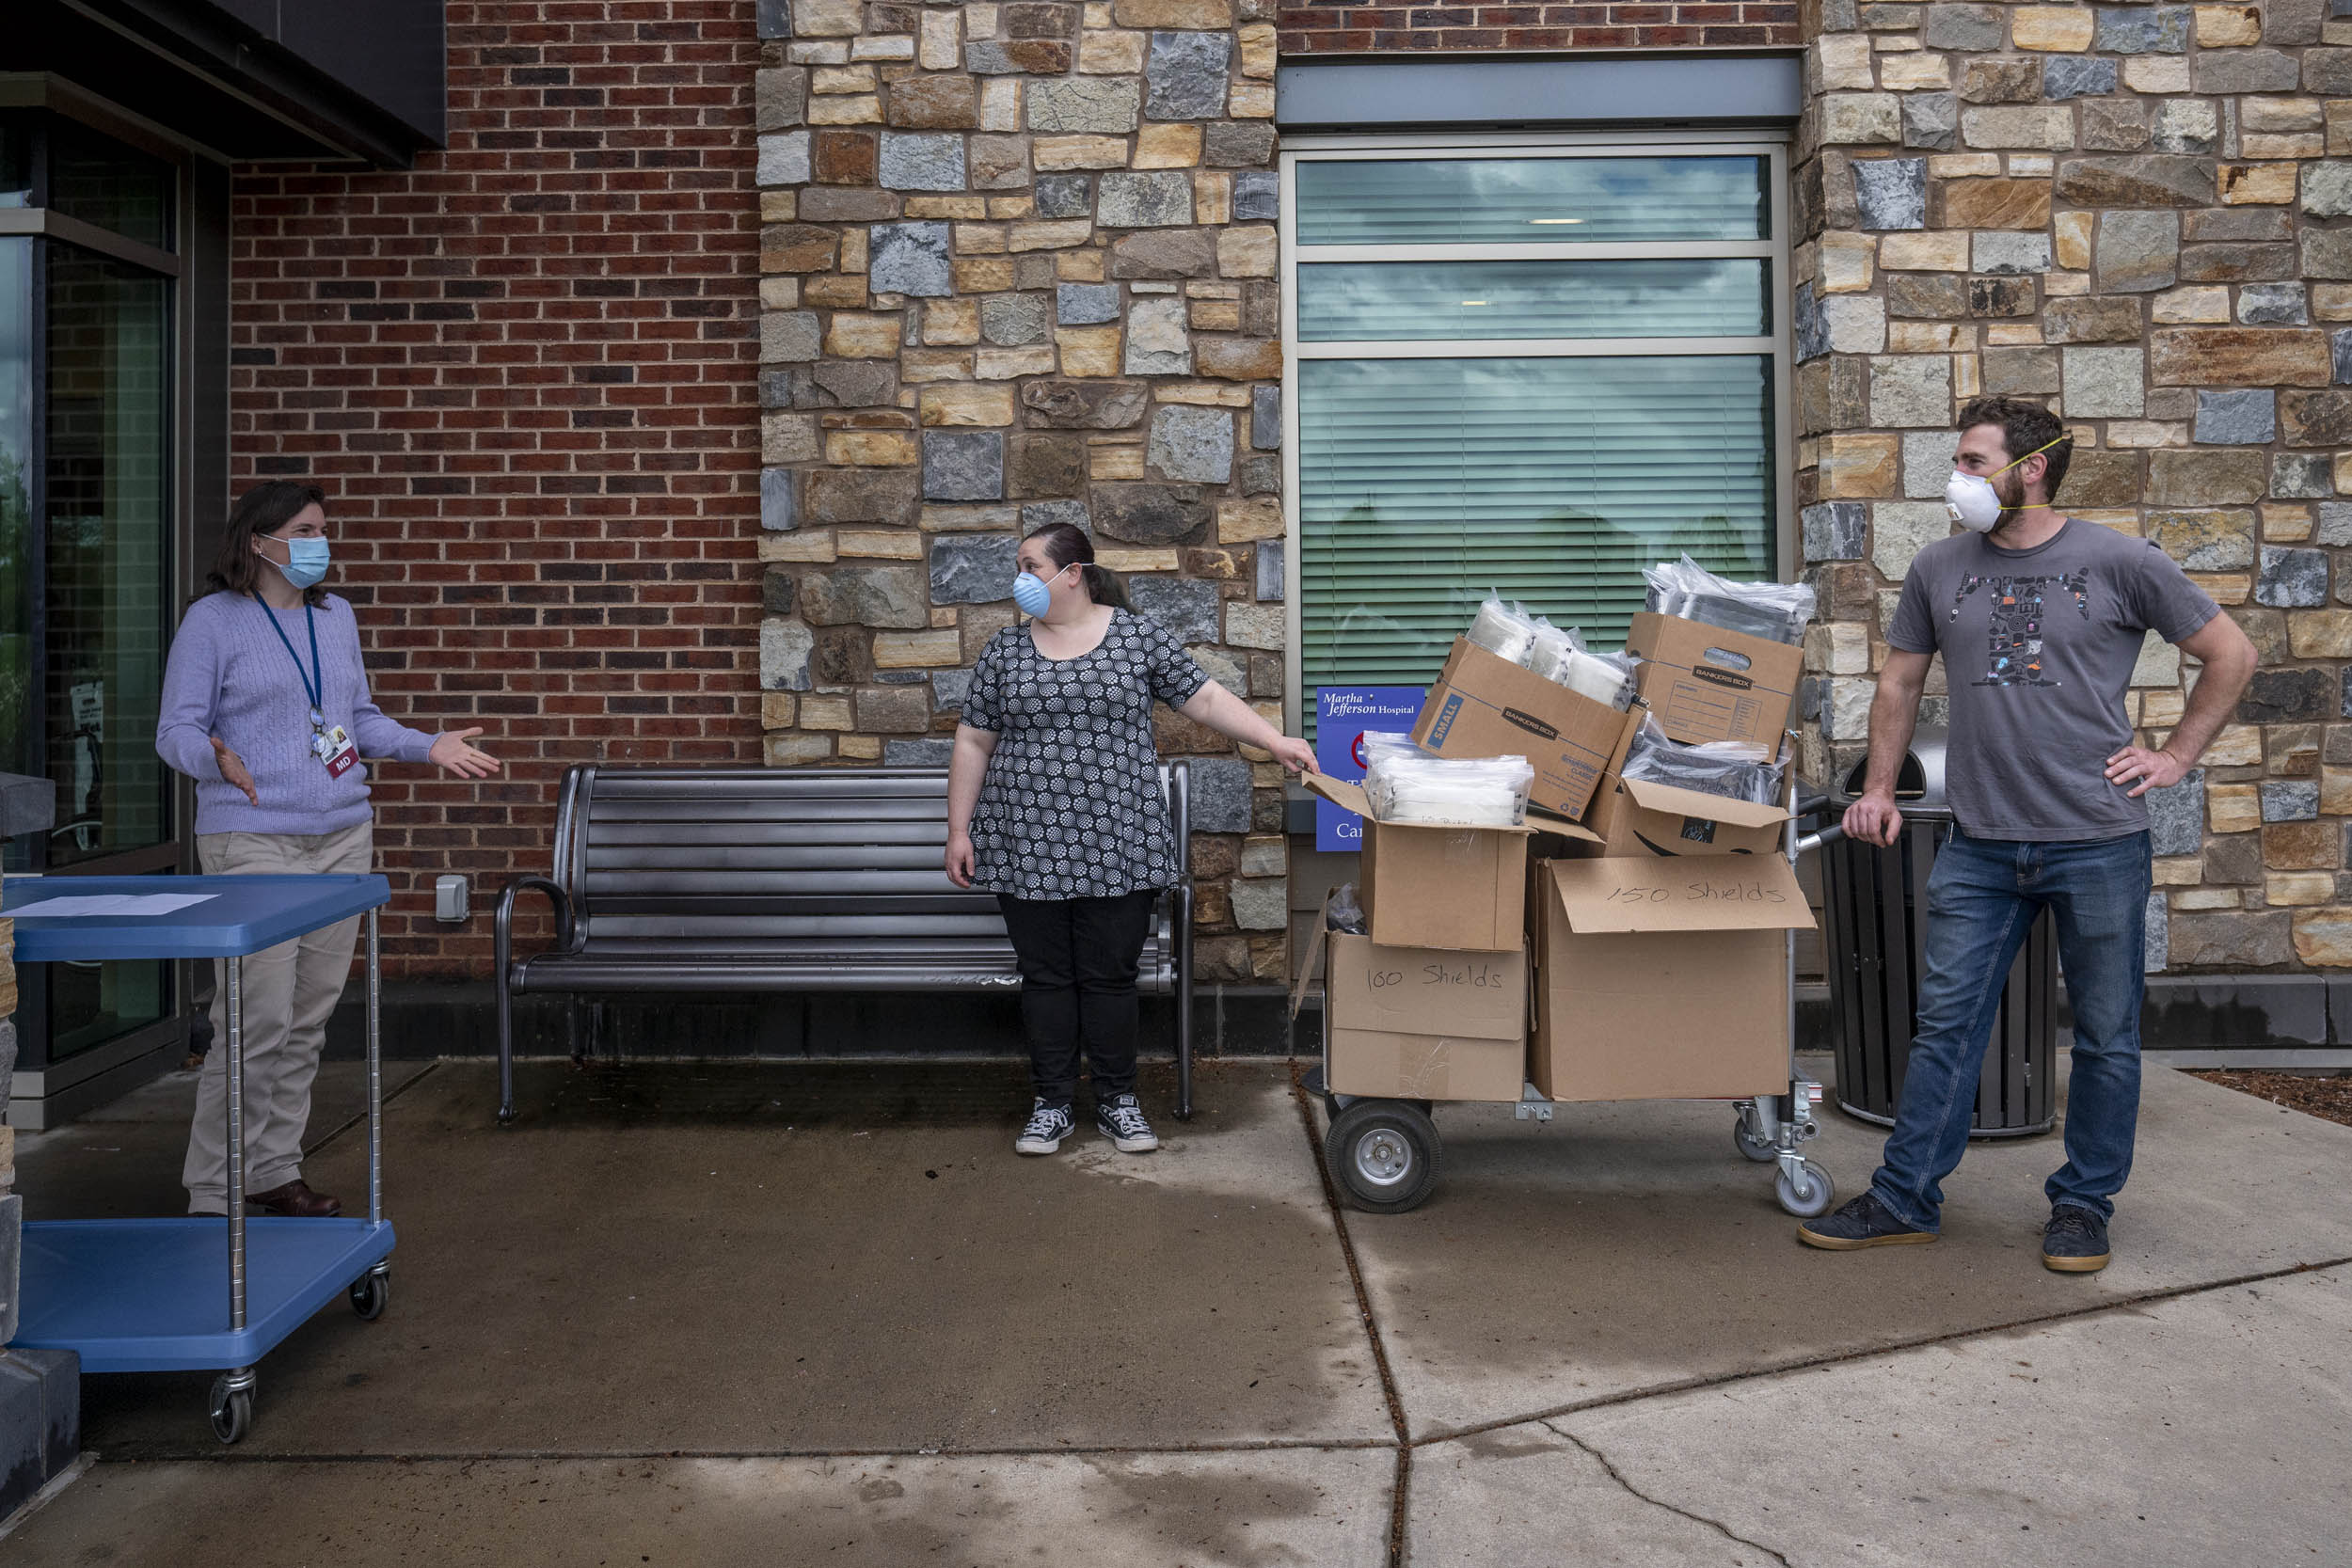 staff members talking while holding a trolly of supplies in brown boxes